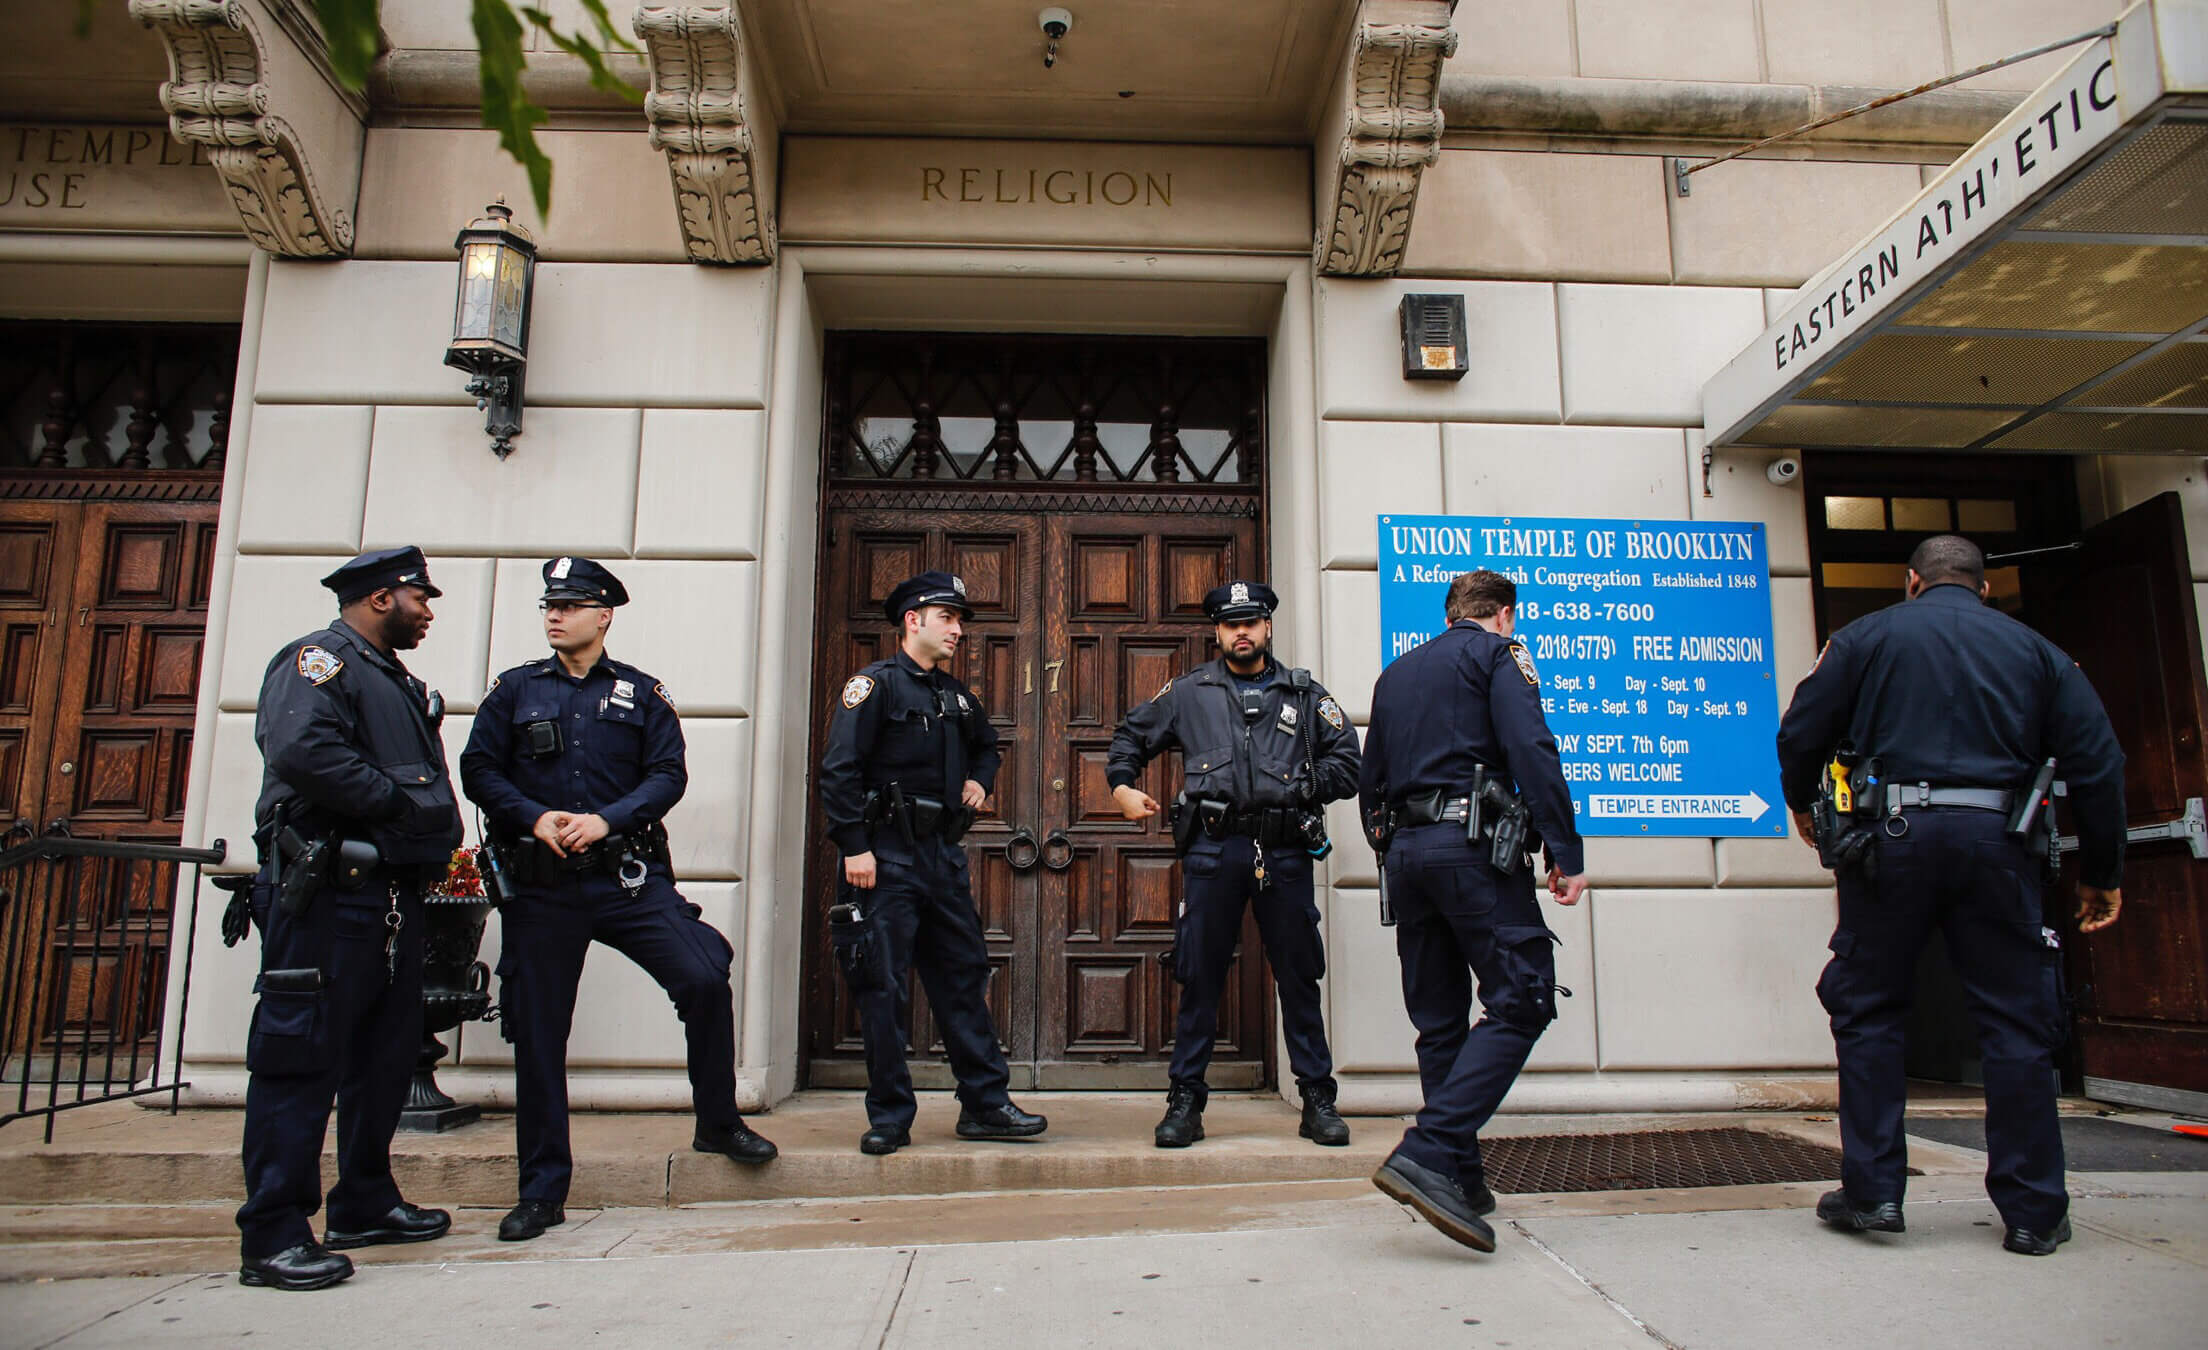 NYPD officers stand guard at the door of the Union Temple of Brooklyn on November 2, 2018.